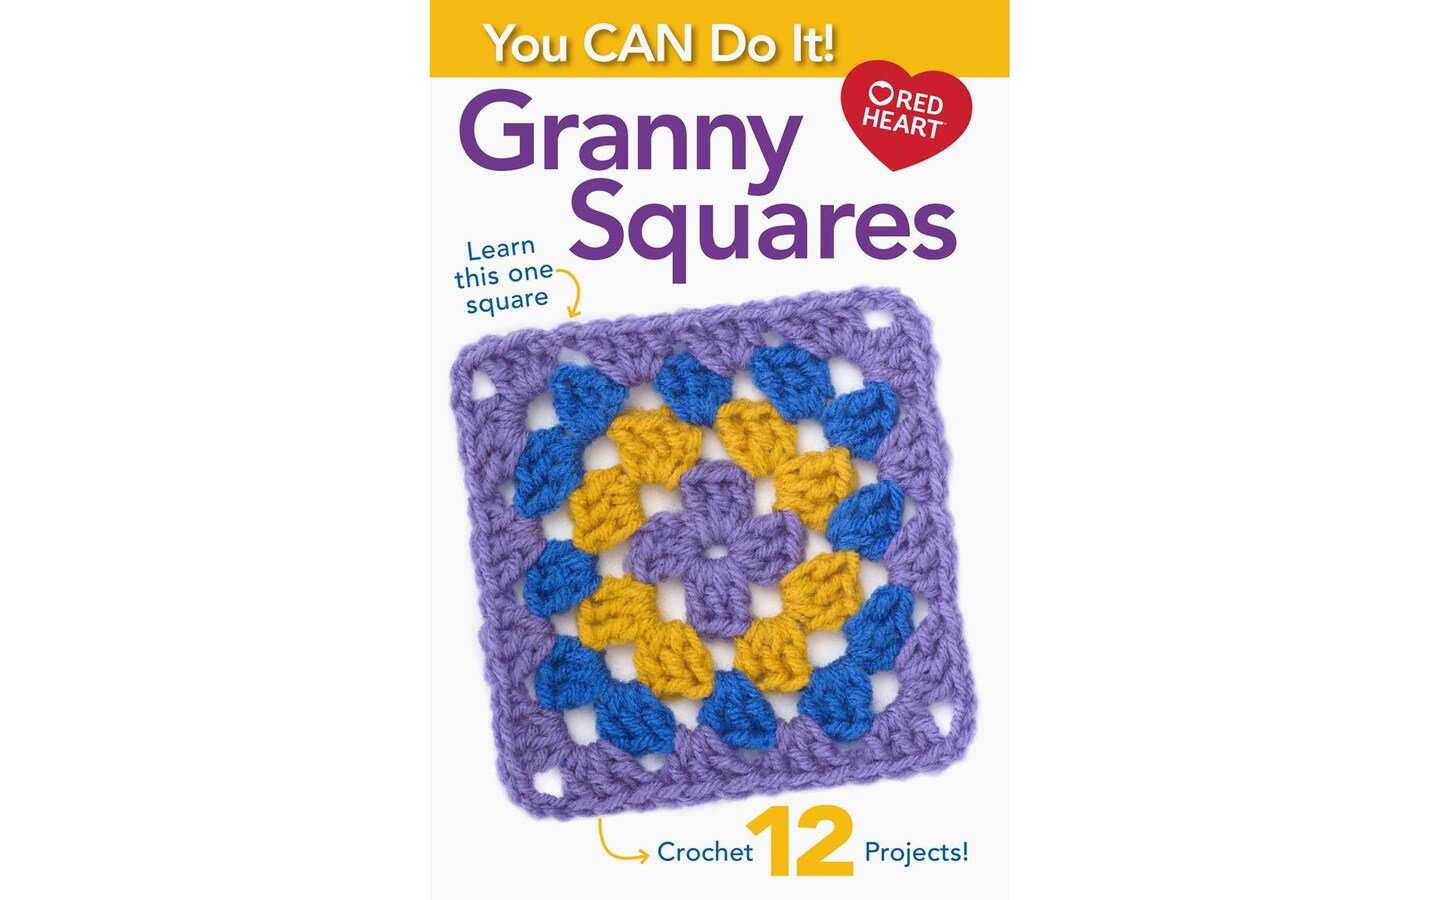 Been working on this for a year, all the granny squares in a book